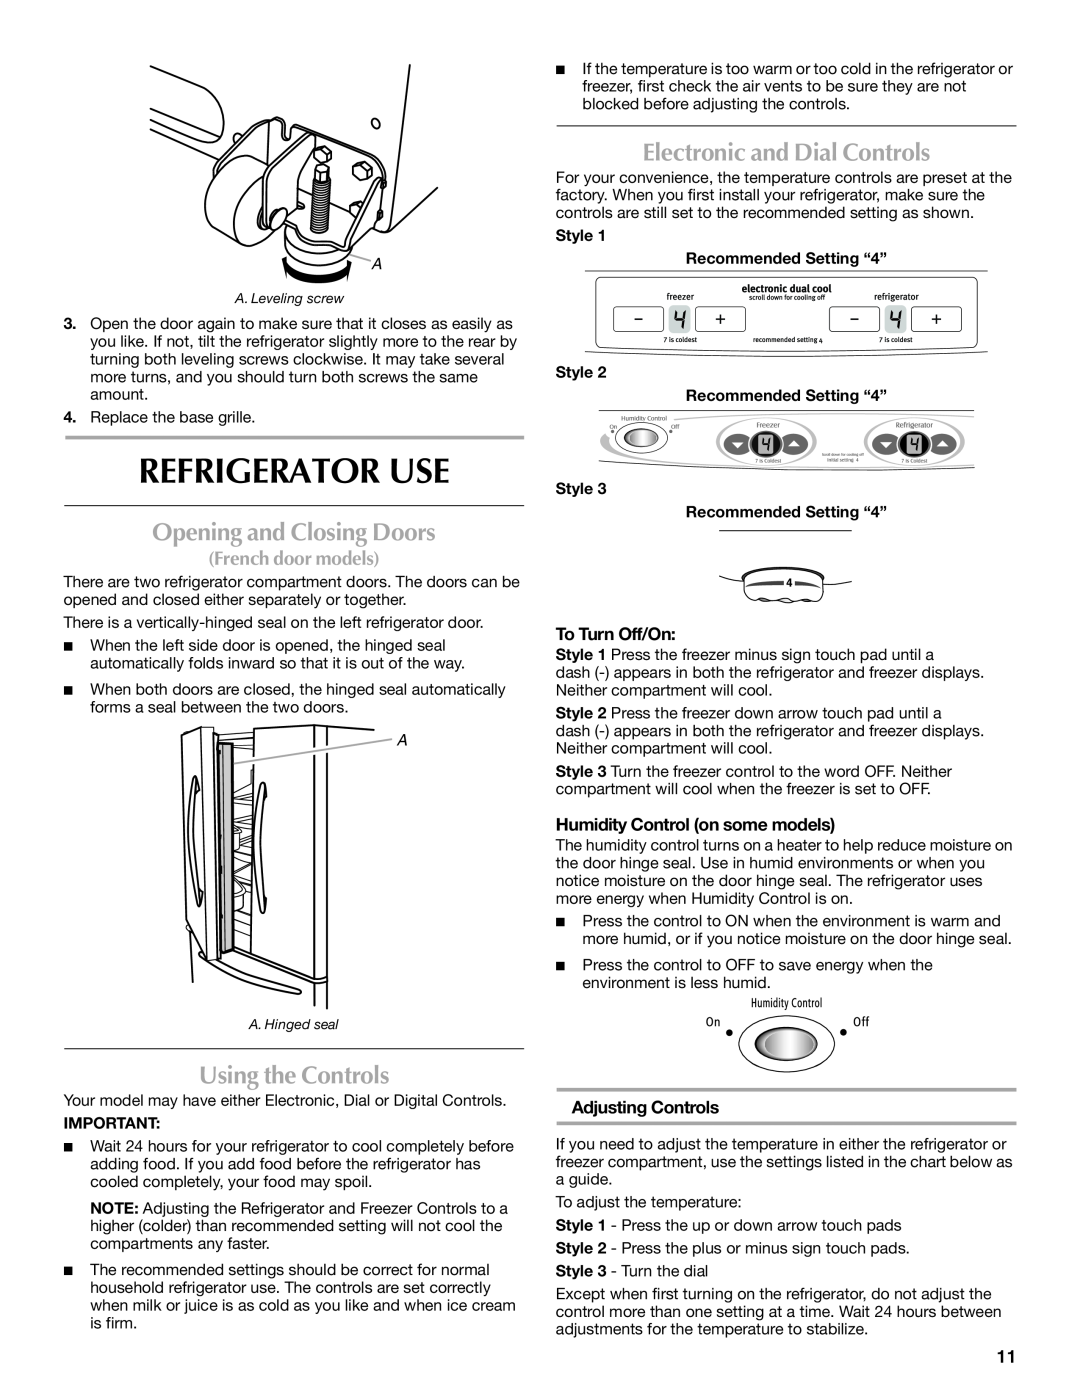 Maytag MBL2258XES Refrigerator Use, Opening and Closing Doors, Using the Controls, Electronic and Dial Controls 